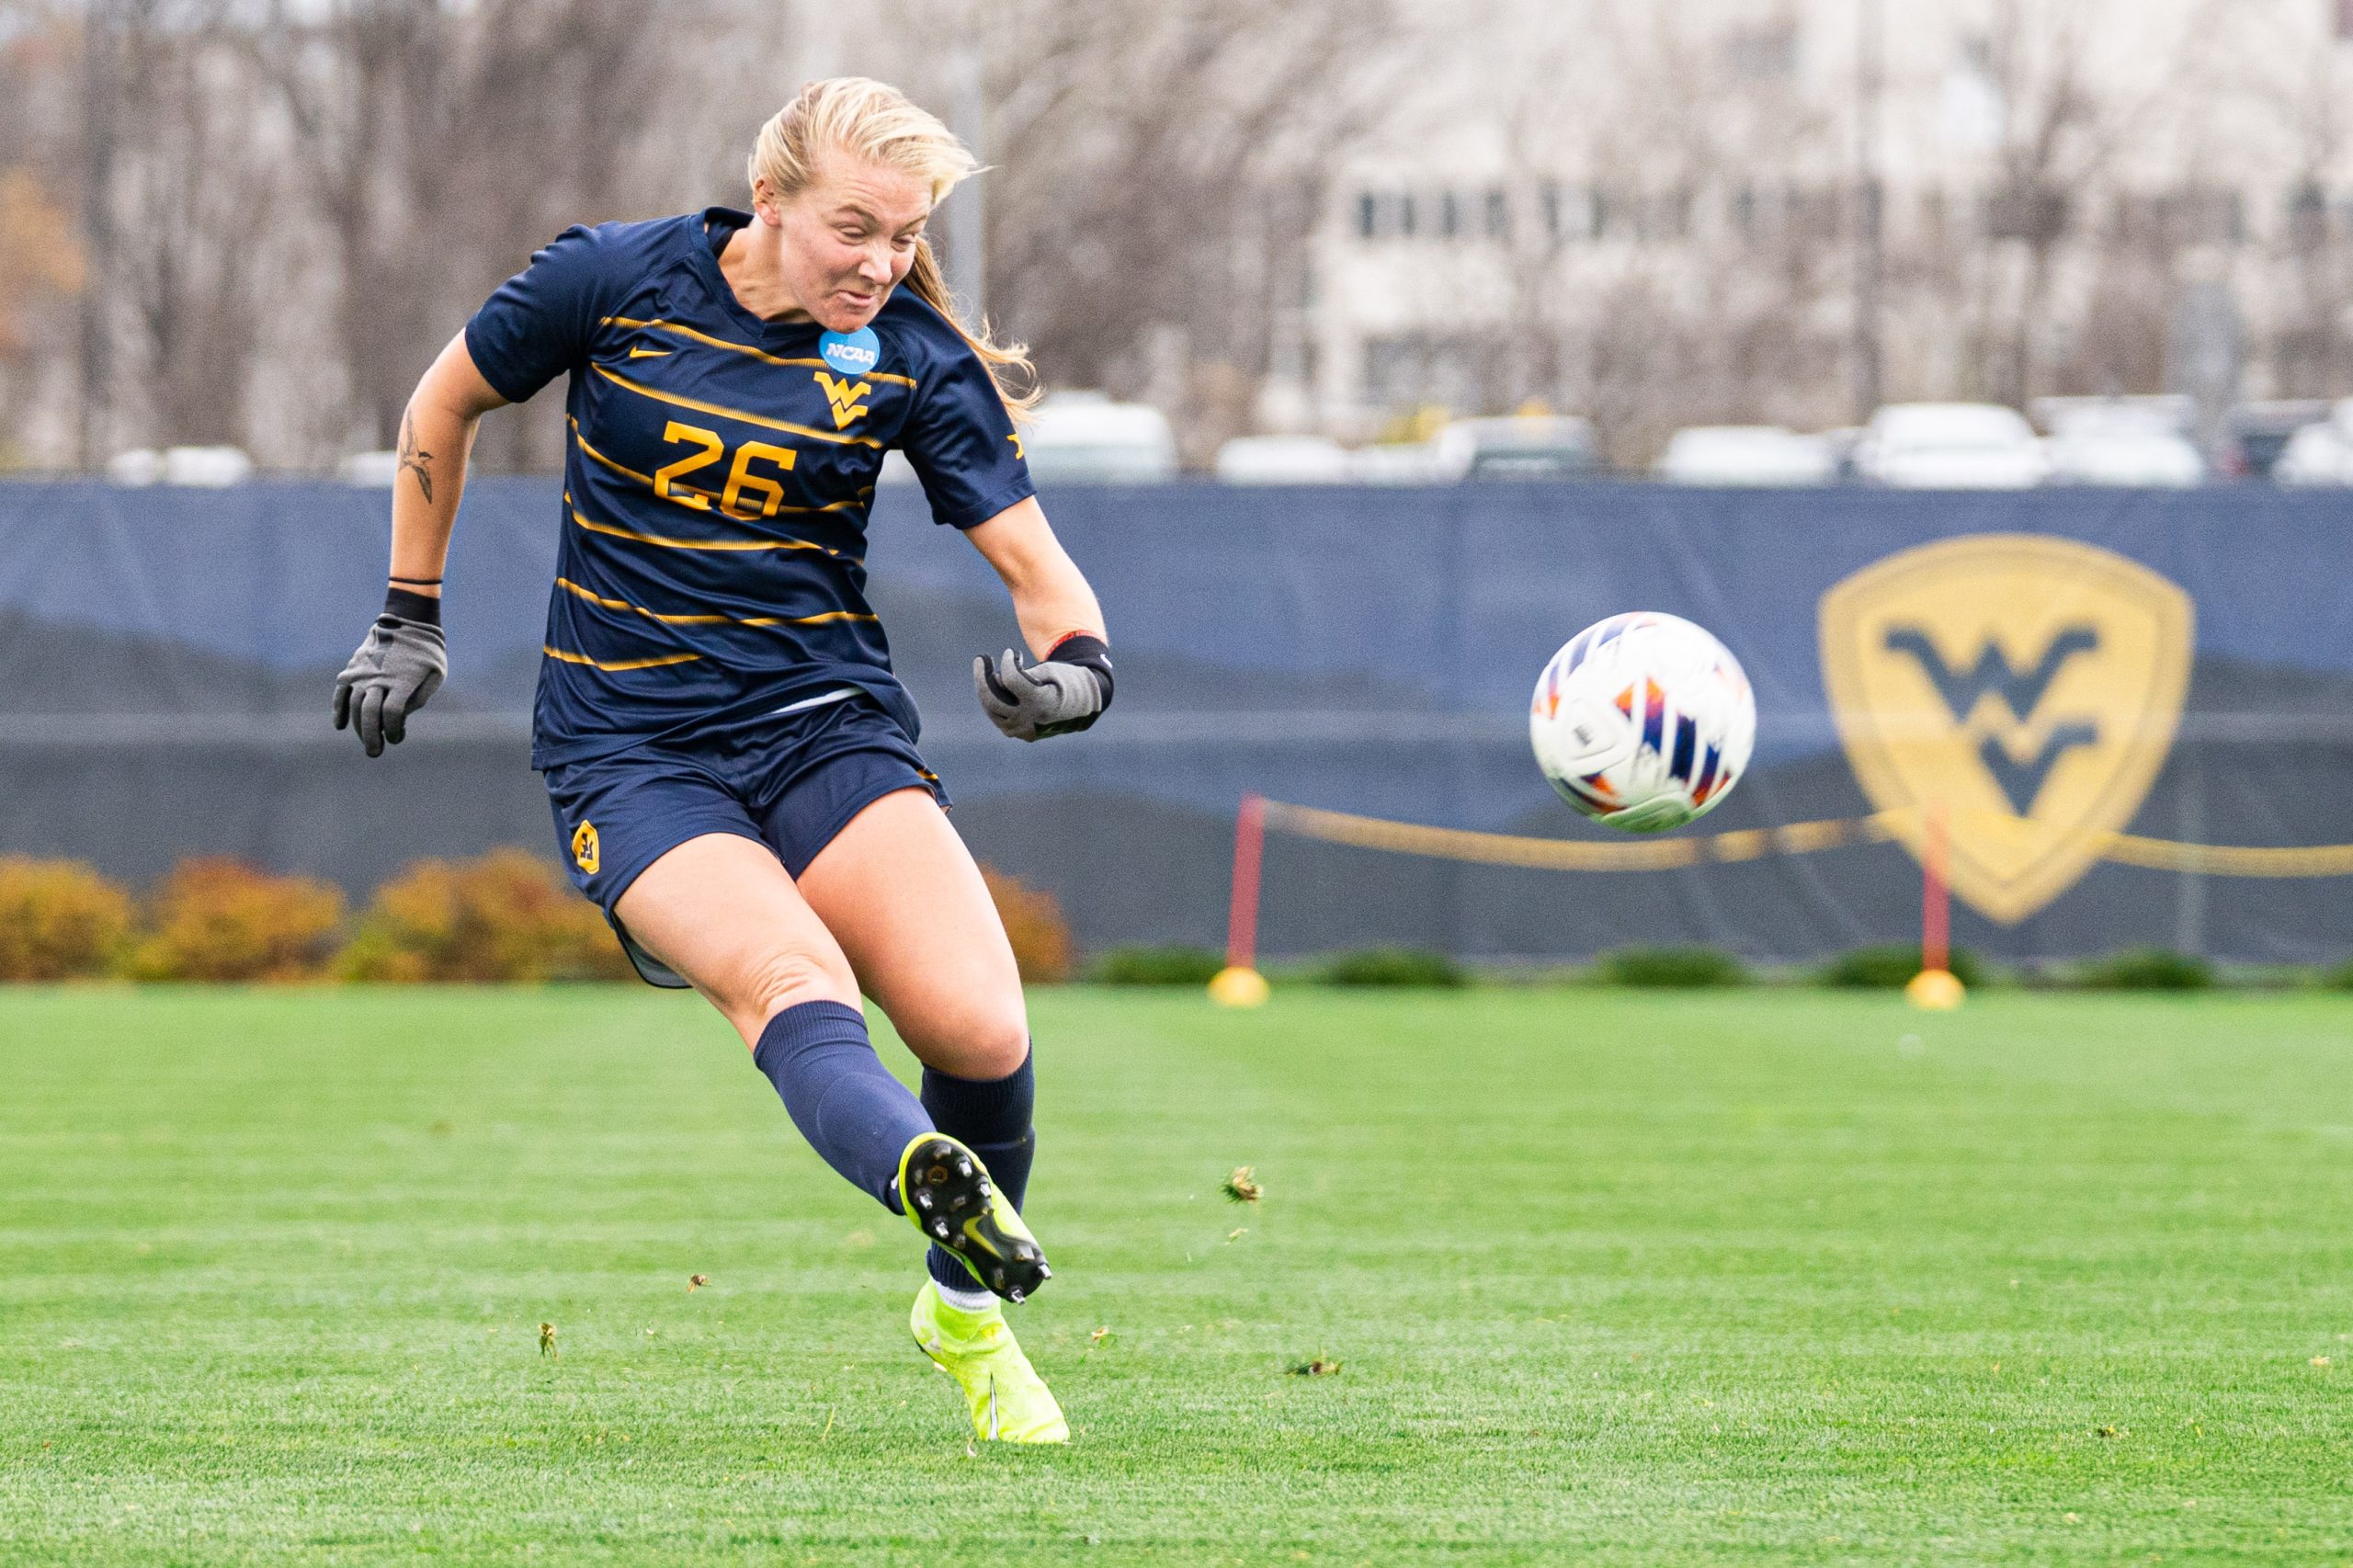 WVU women's soccer runs past Virginia Tech to advance to the second round of the NCAA tournament